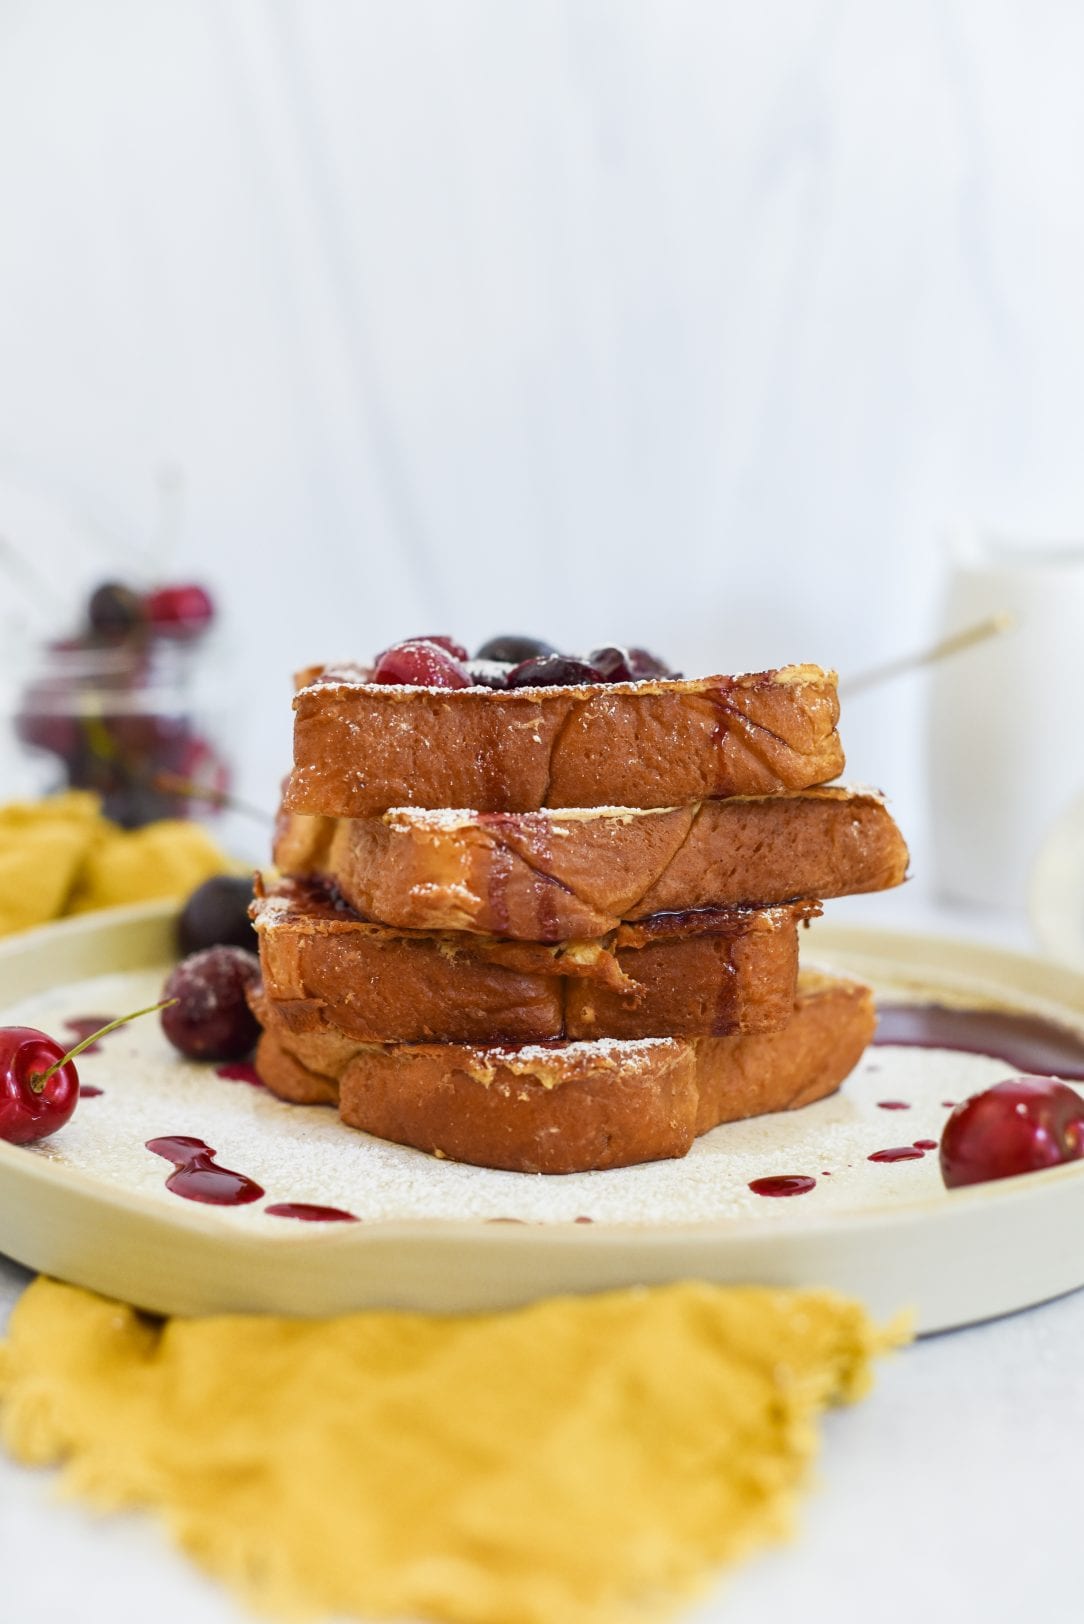 Old-Fashioned Cherry French Toast